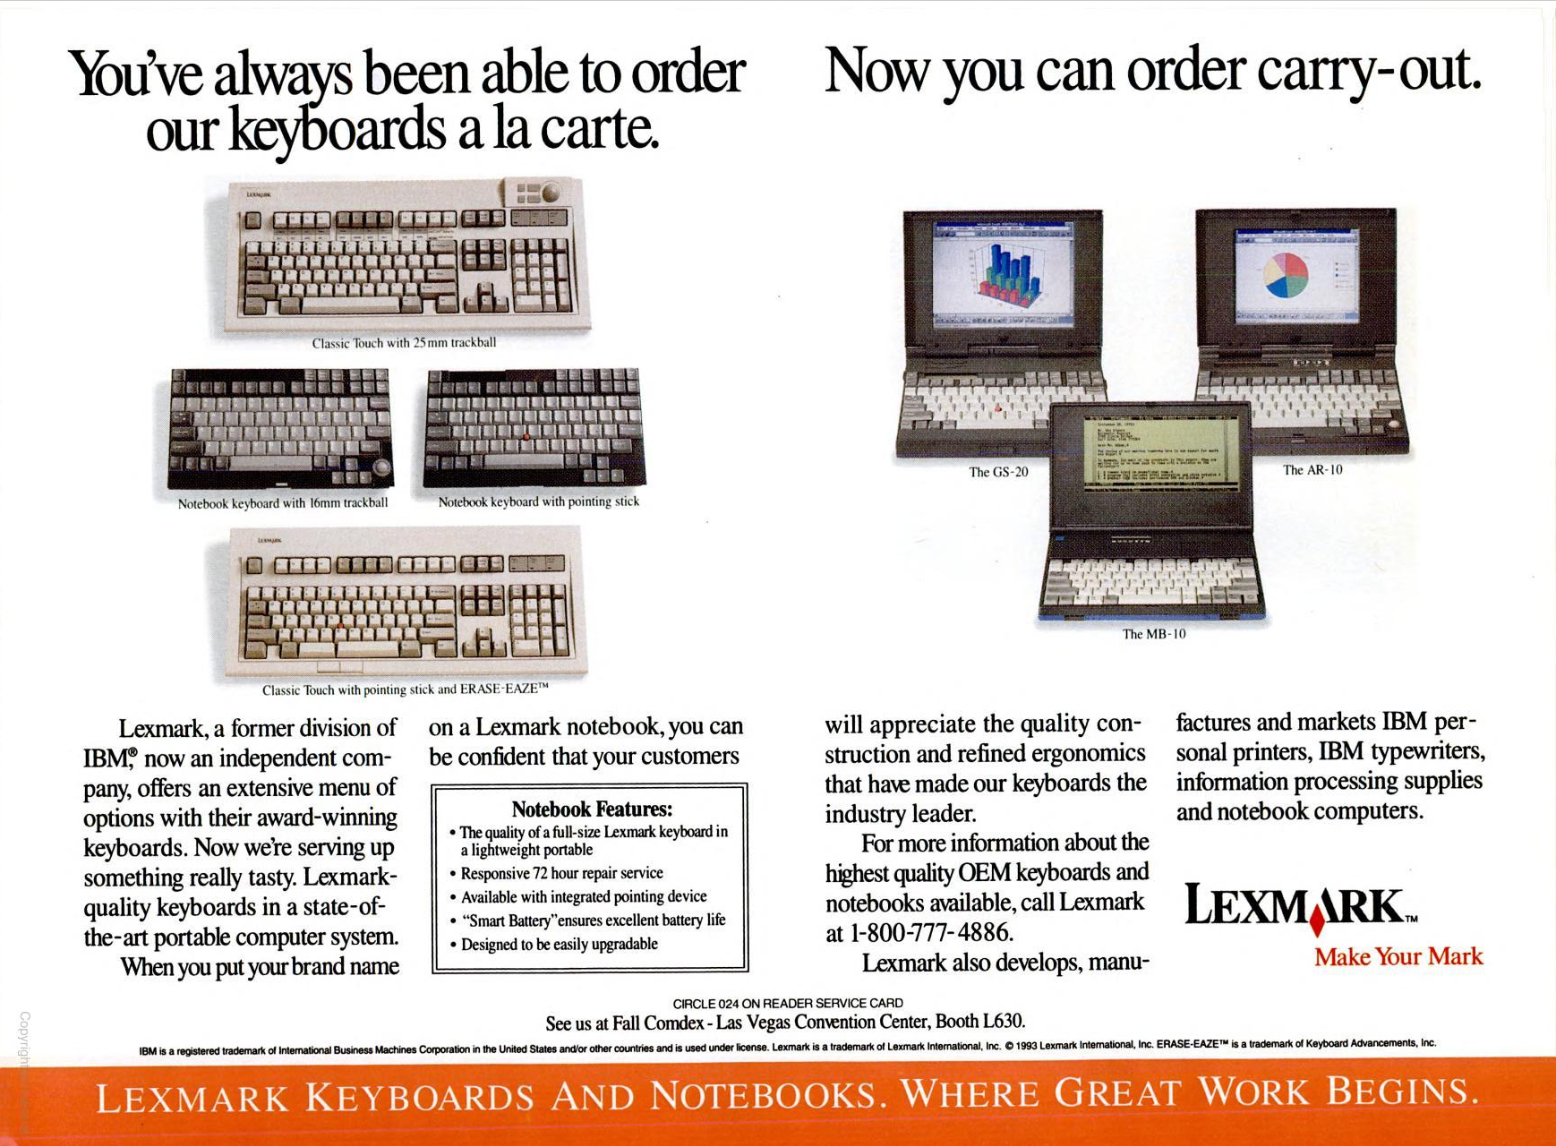 Lexmark advert from December 1993<a class='source-link' href='/wiki?id=modelm#Sources'><sup>[7]</sup></a>